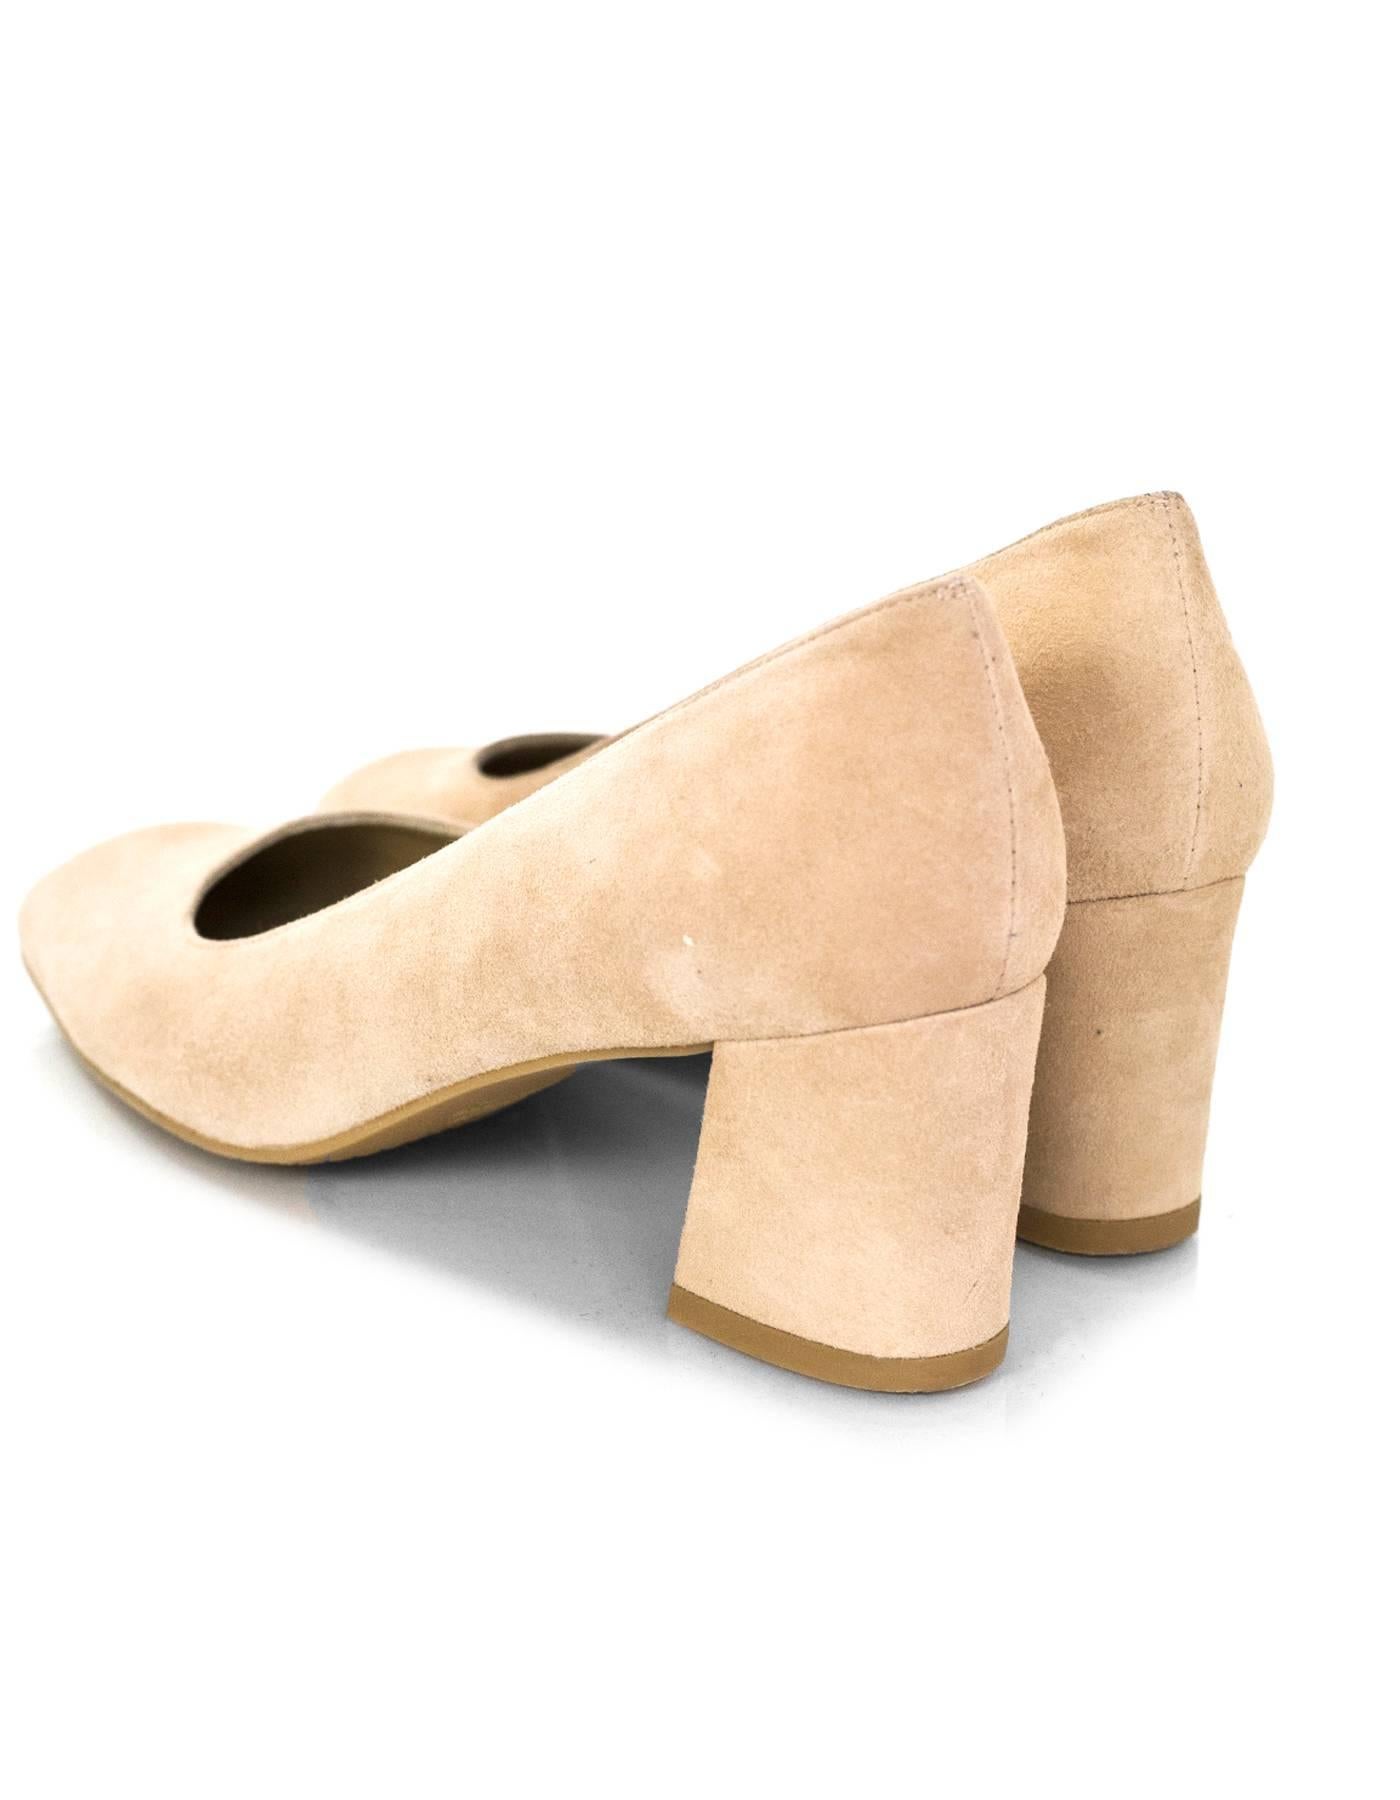 Stuart Weitzman Beige Suede Square-Toe Pumps Sz 7.5 NIB In Excellent Condition In New York, NY